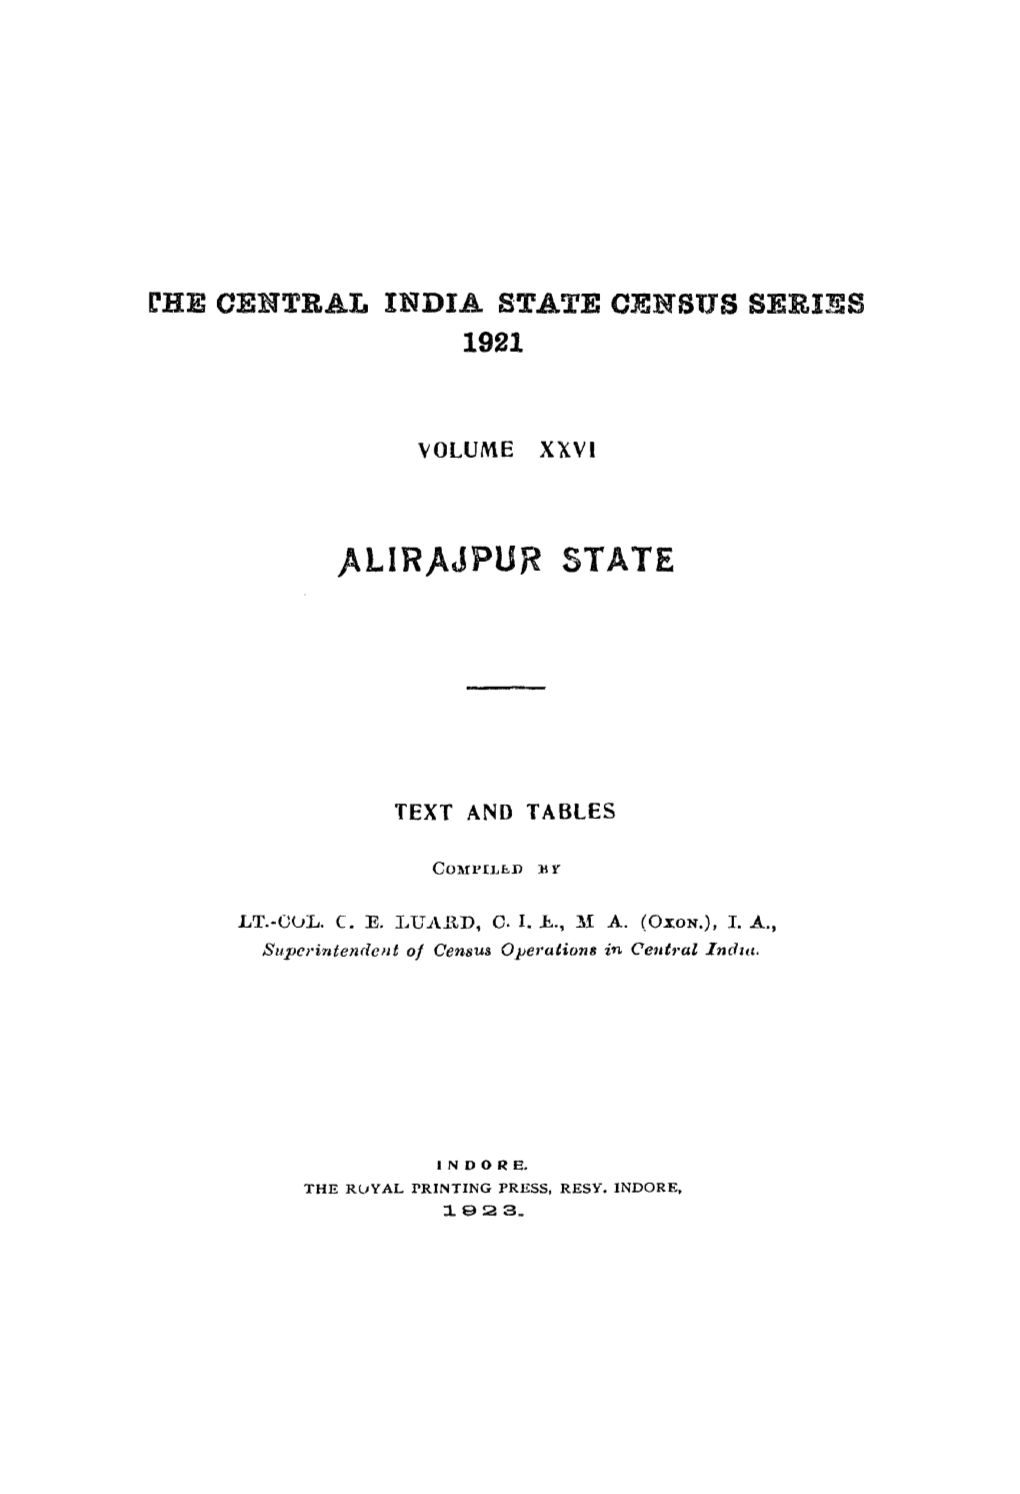 THE CENTRAL INDIA STATE CENSUS SERIES 1921.Pdf